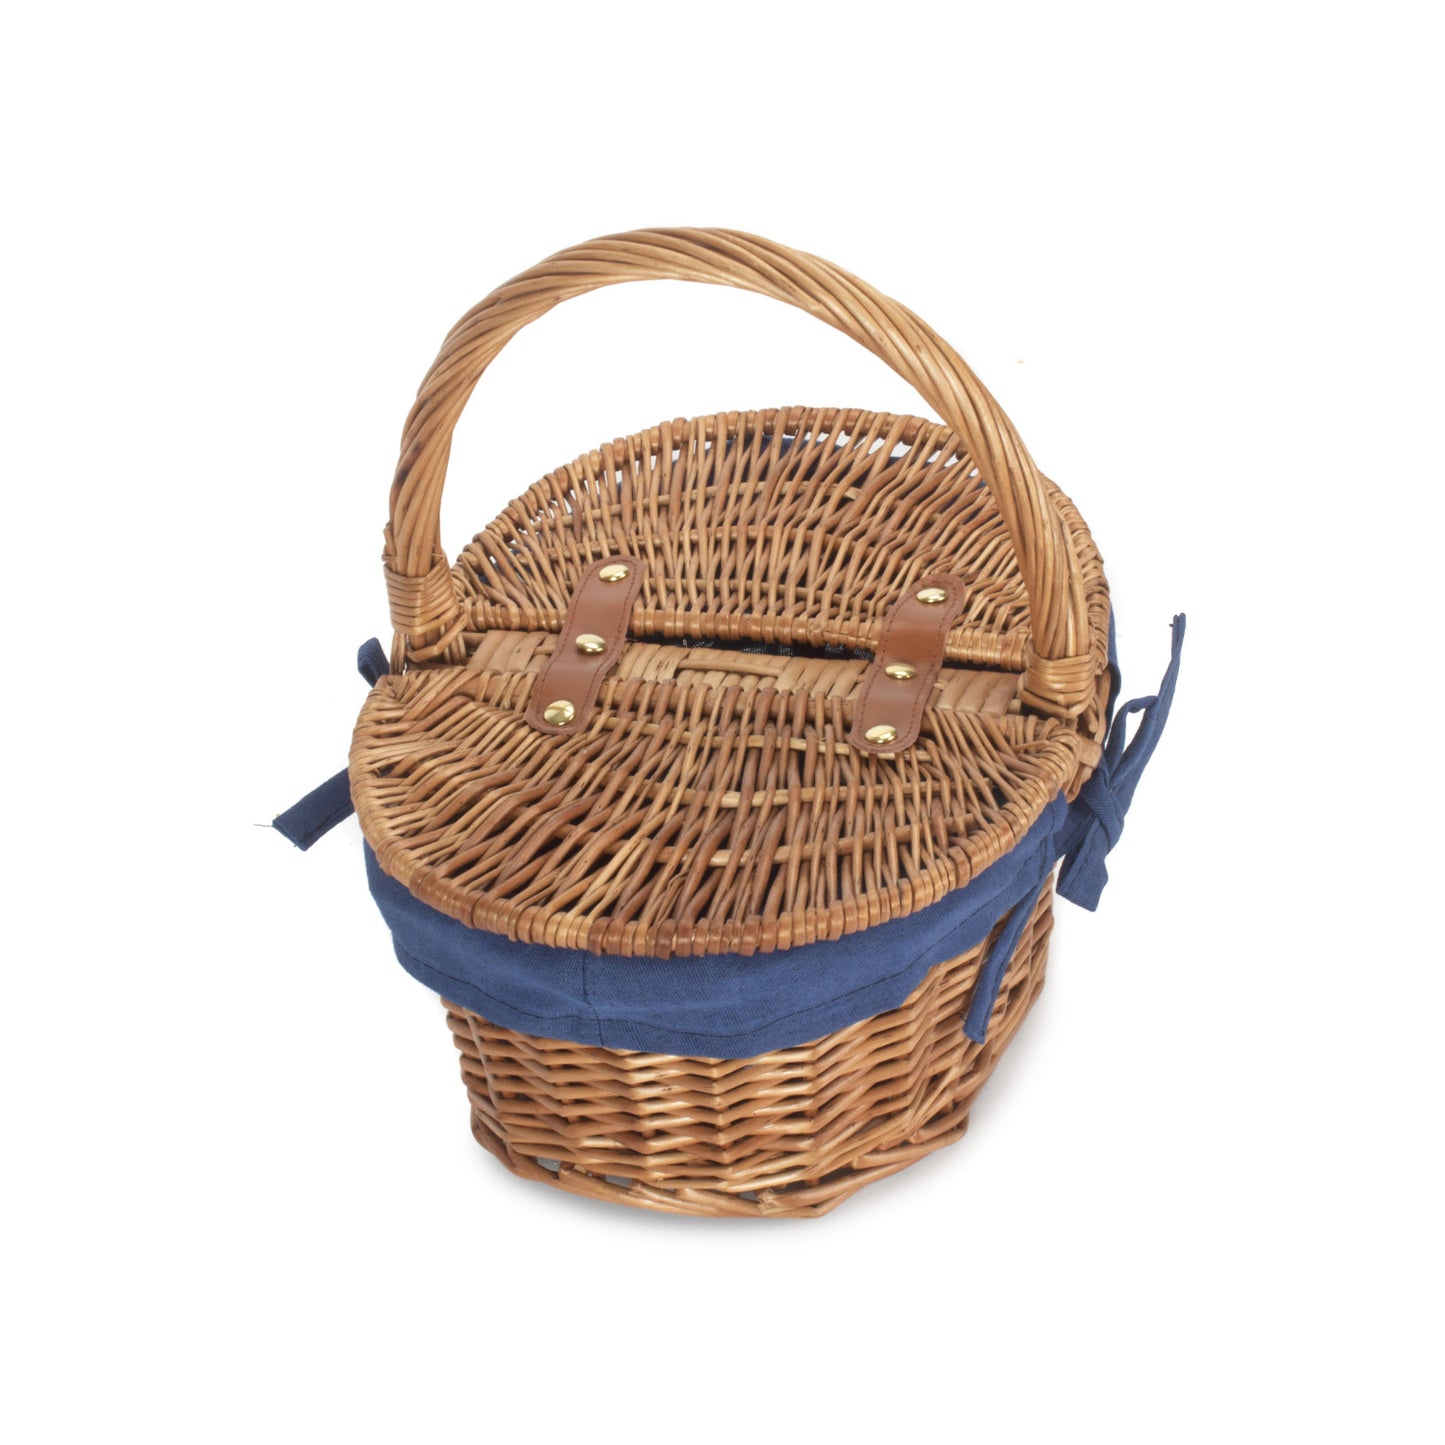 Child's Light Steamed Finish Oval Picnic Basket With Navy Blue Lining